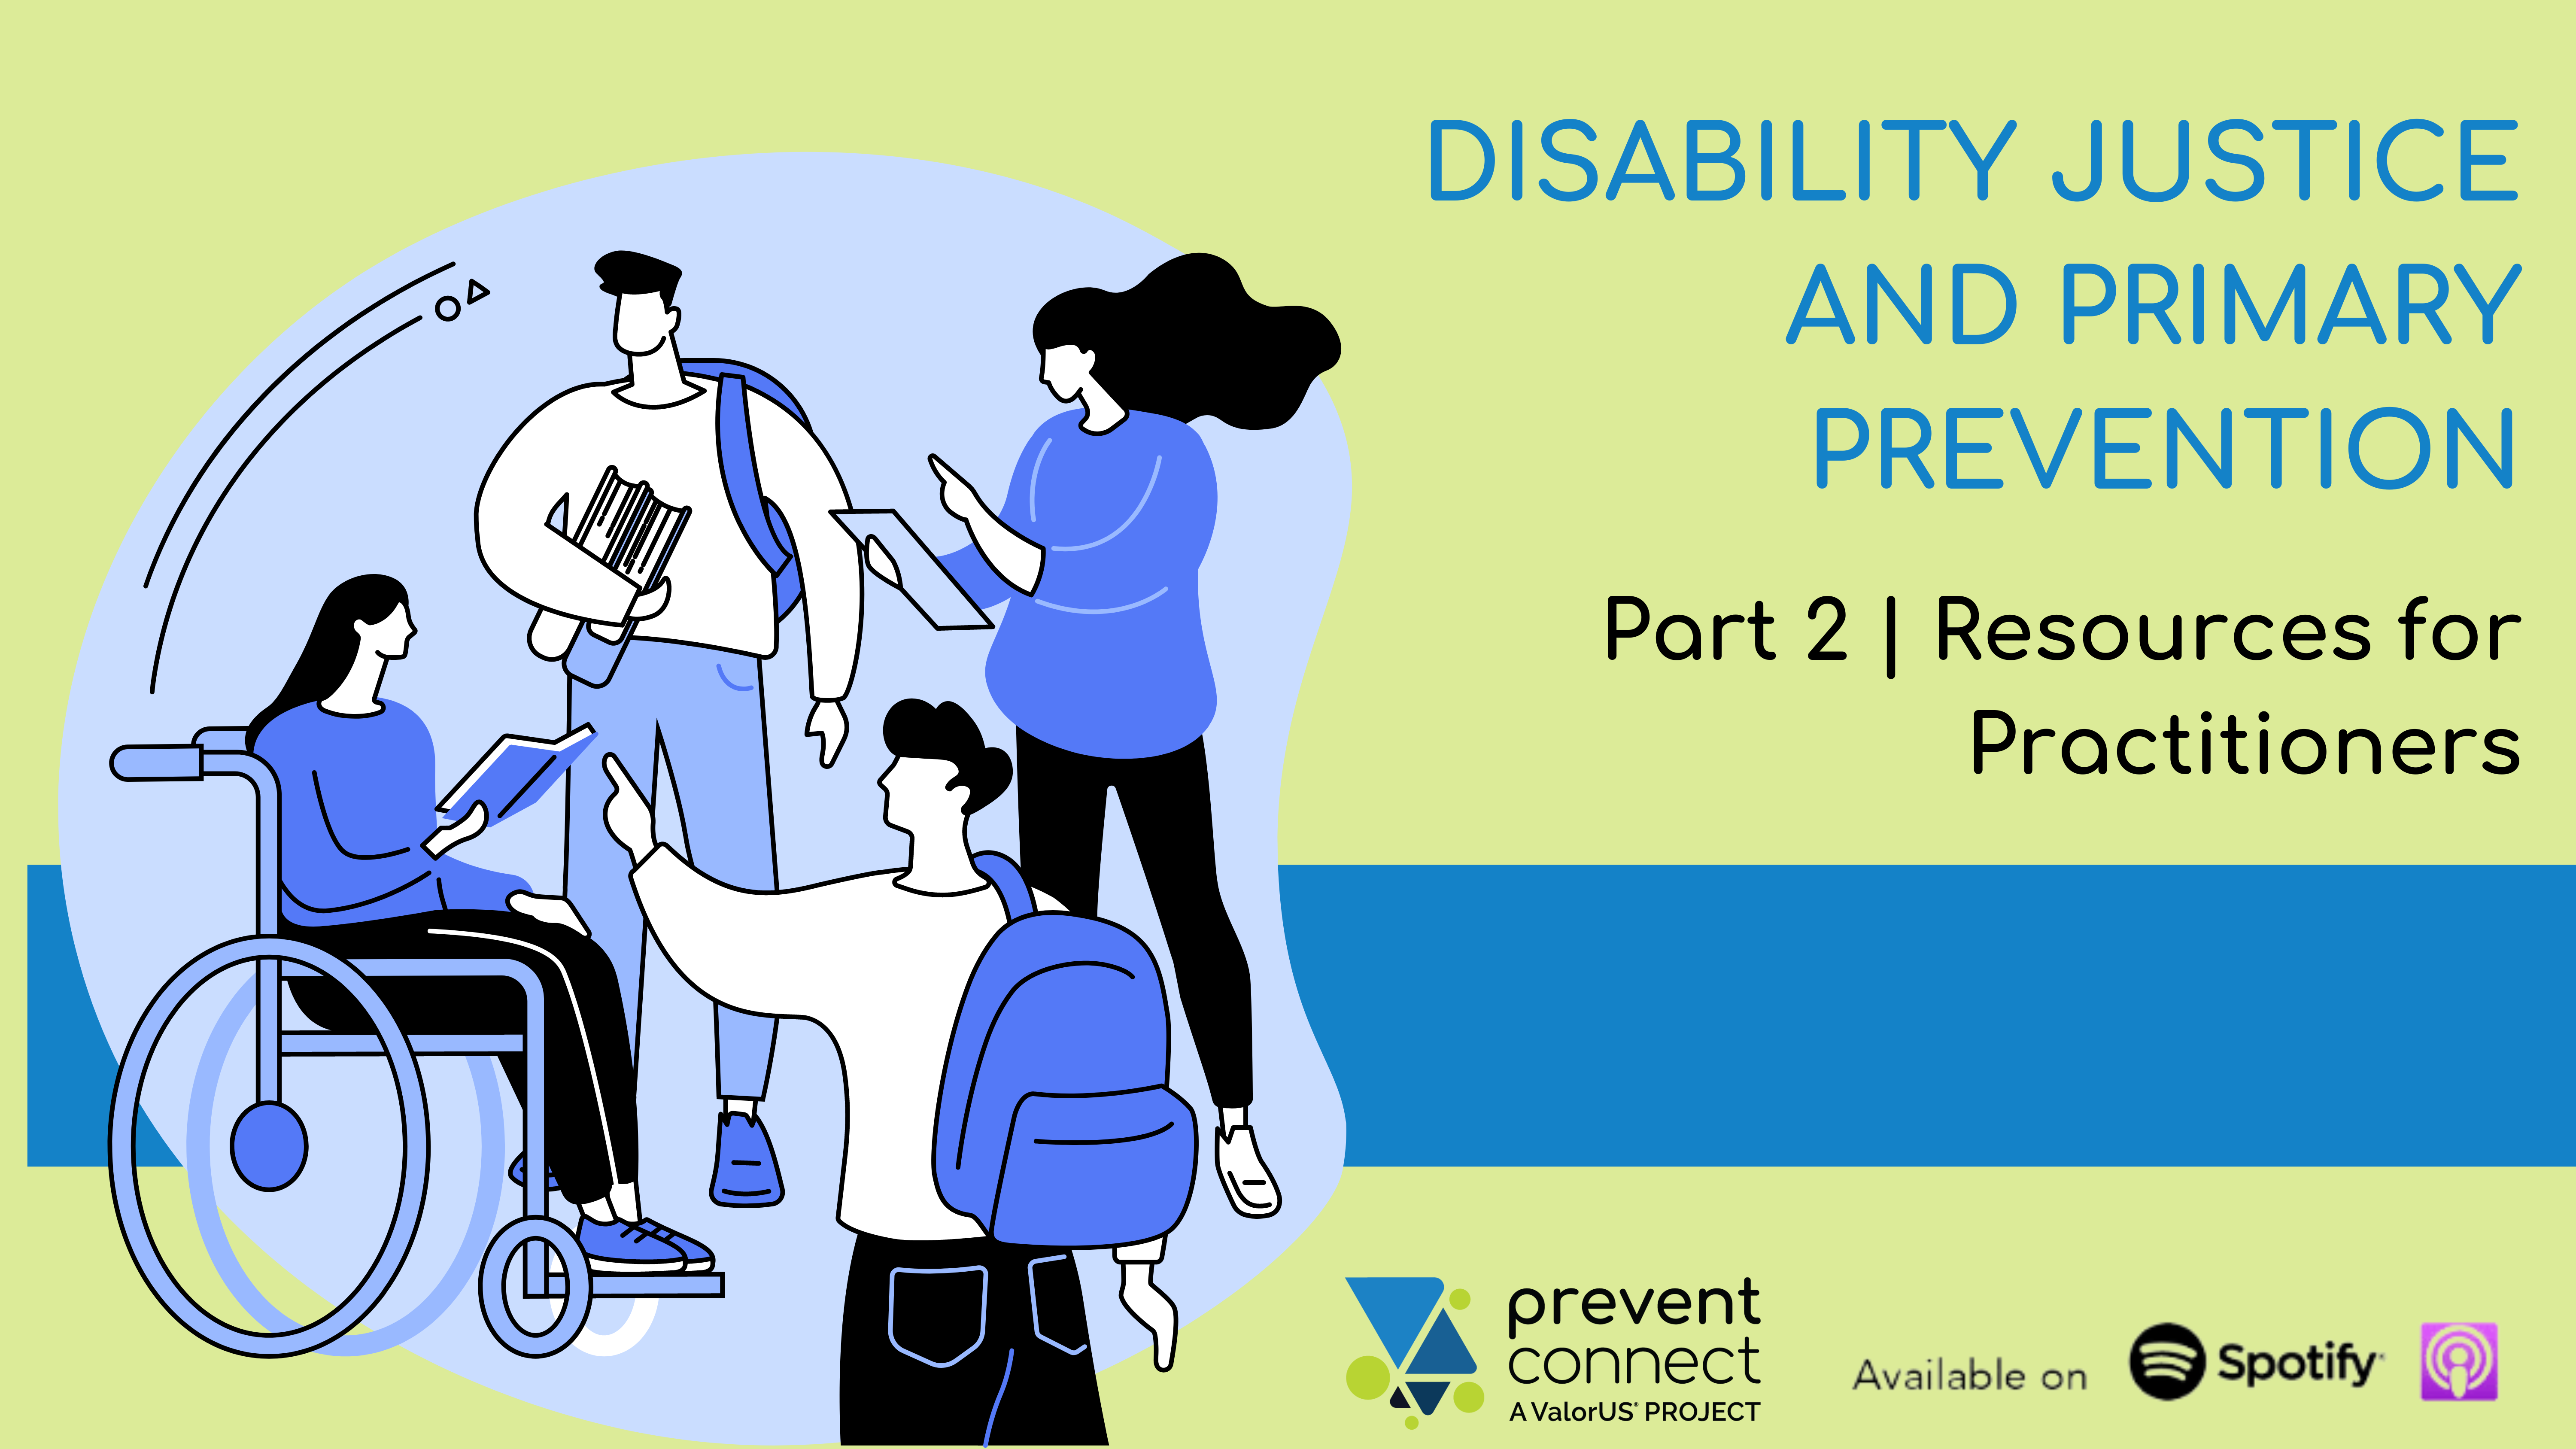 Disability Justice and Primary Prevention Part 2 | Resources for Practitioners